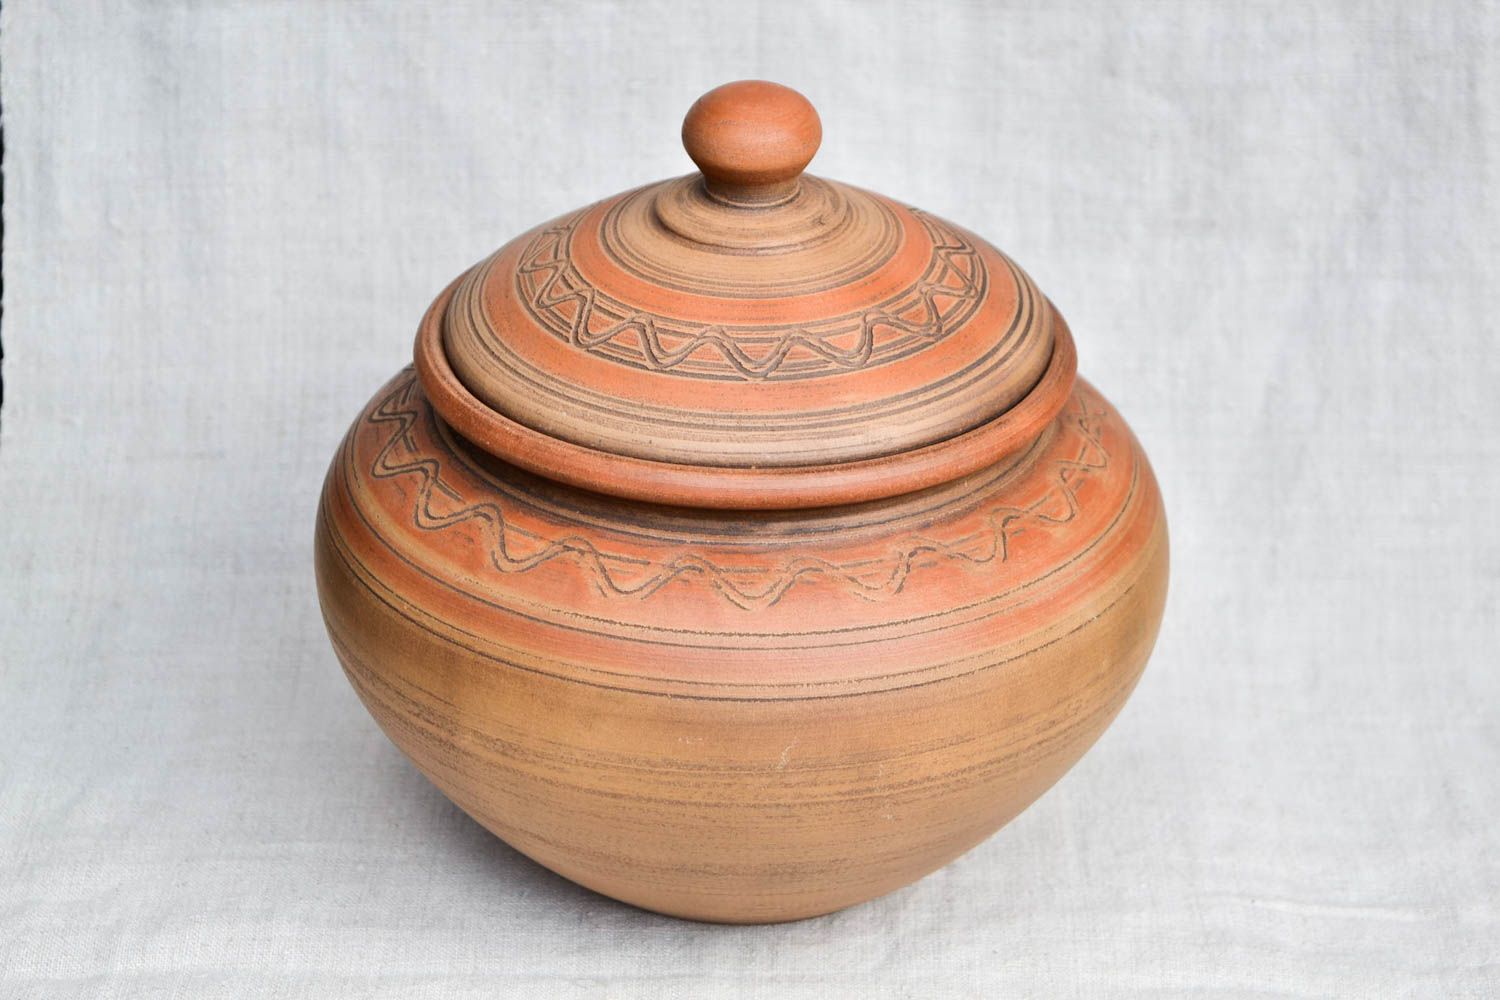 100 oz ceramic handmade baking pot with a lid in ethnic style 3,8 lb photo 4